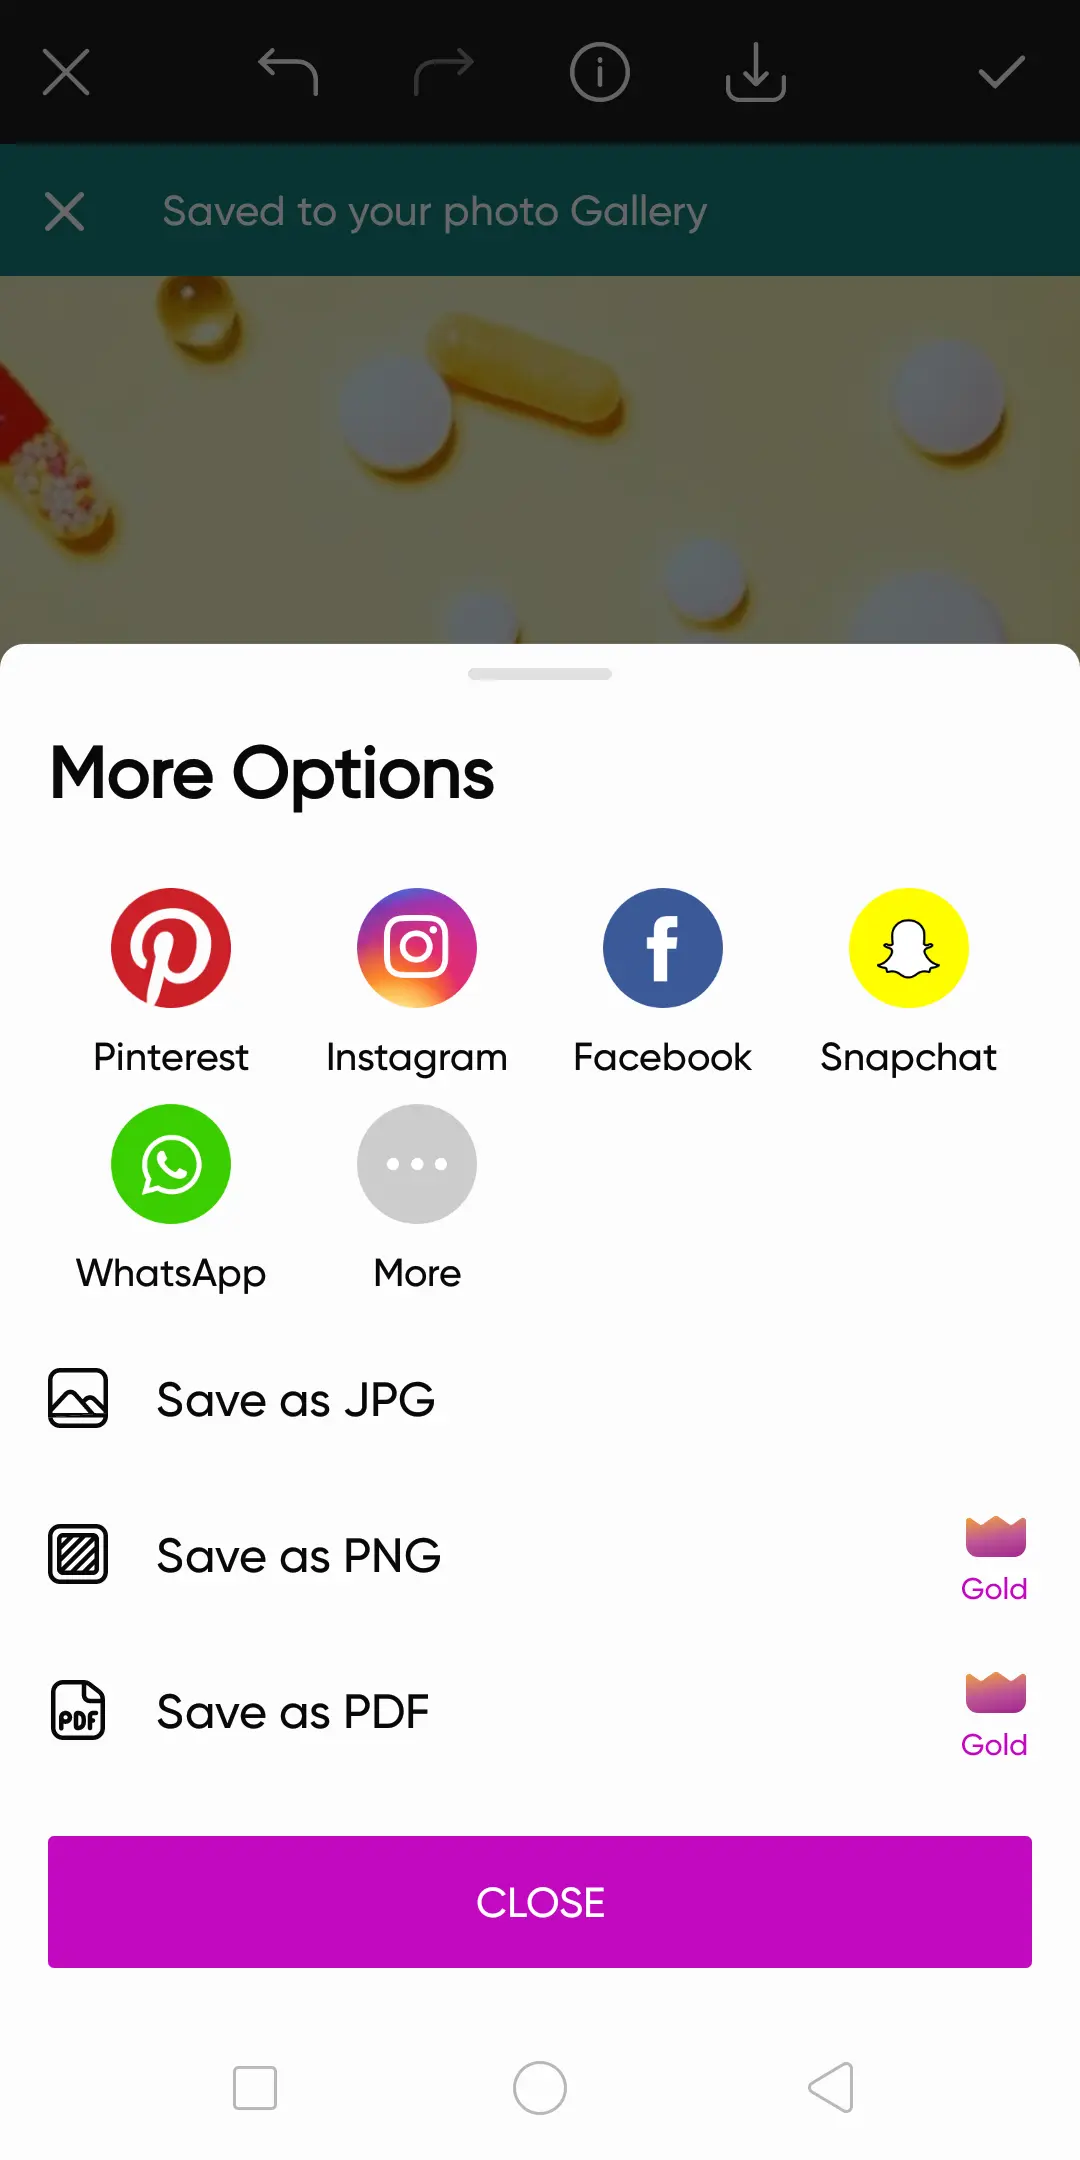 Save image options in Picsart 